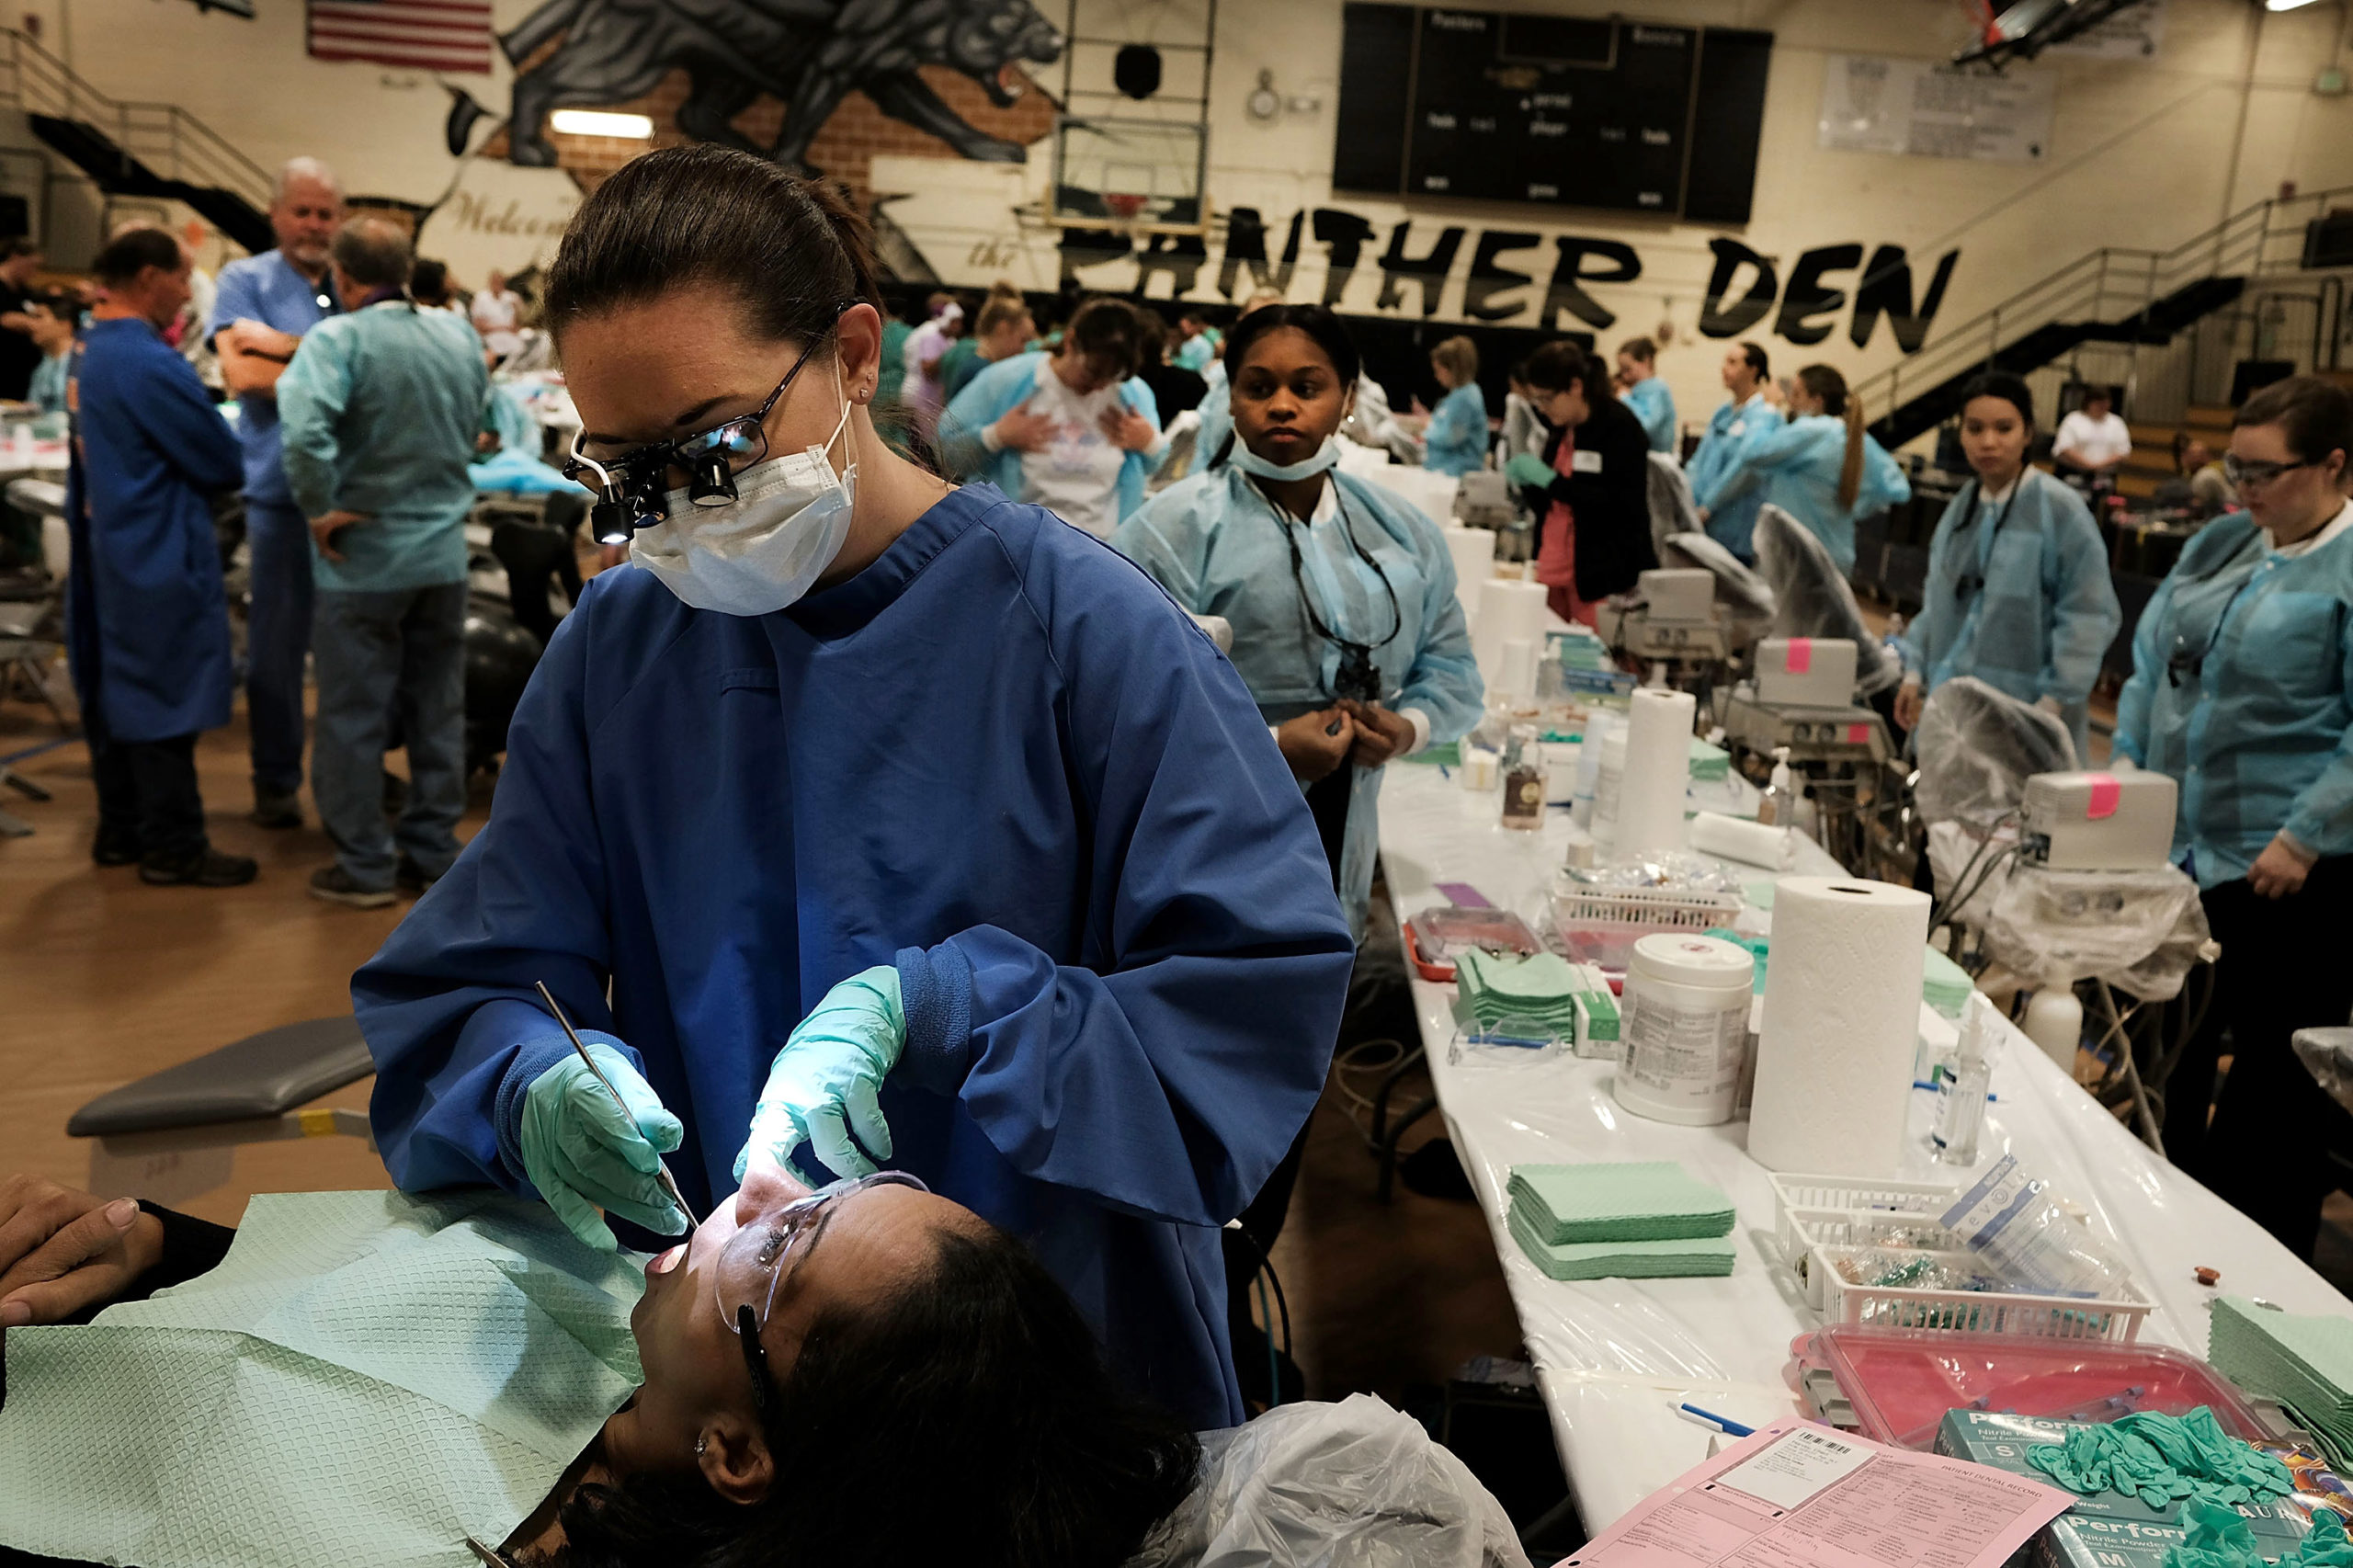 Dentists work on a patient at a remote mobile dental clinic for the poor in 2016 in Milton, Florida. (Spencer Platt/Getty Images)